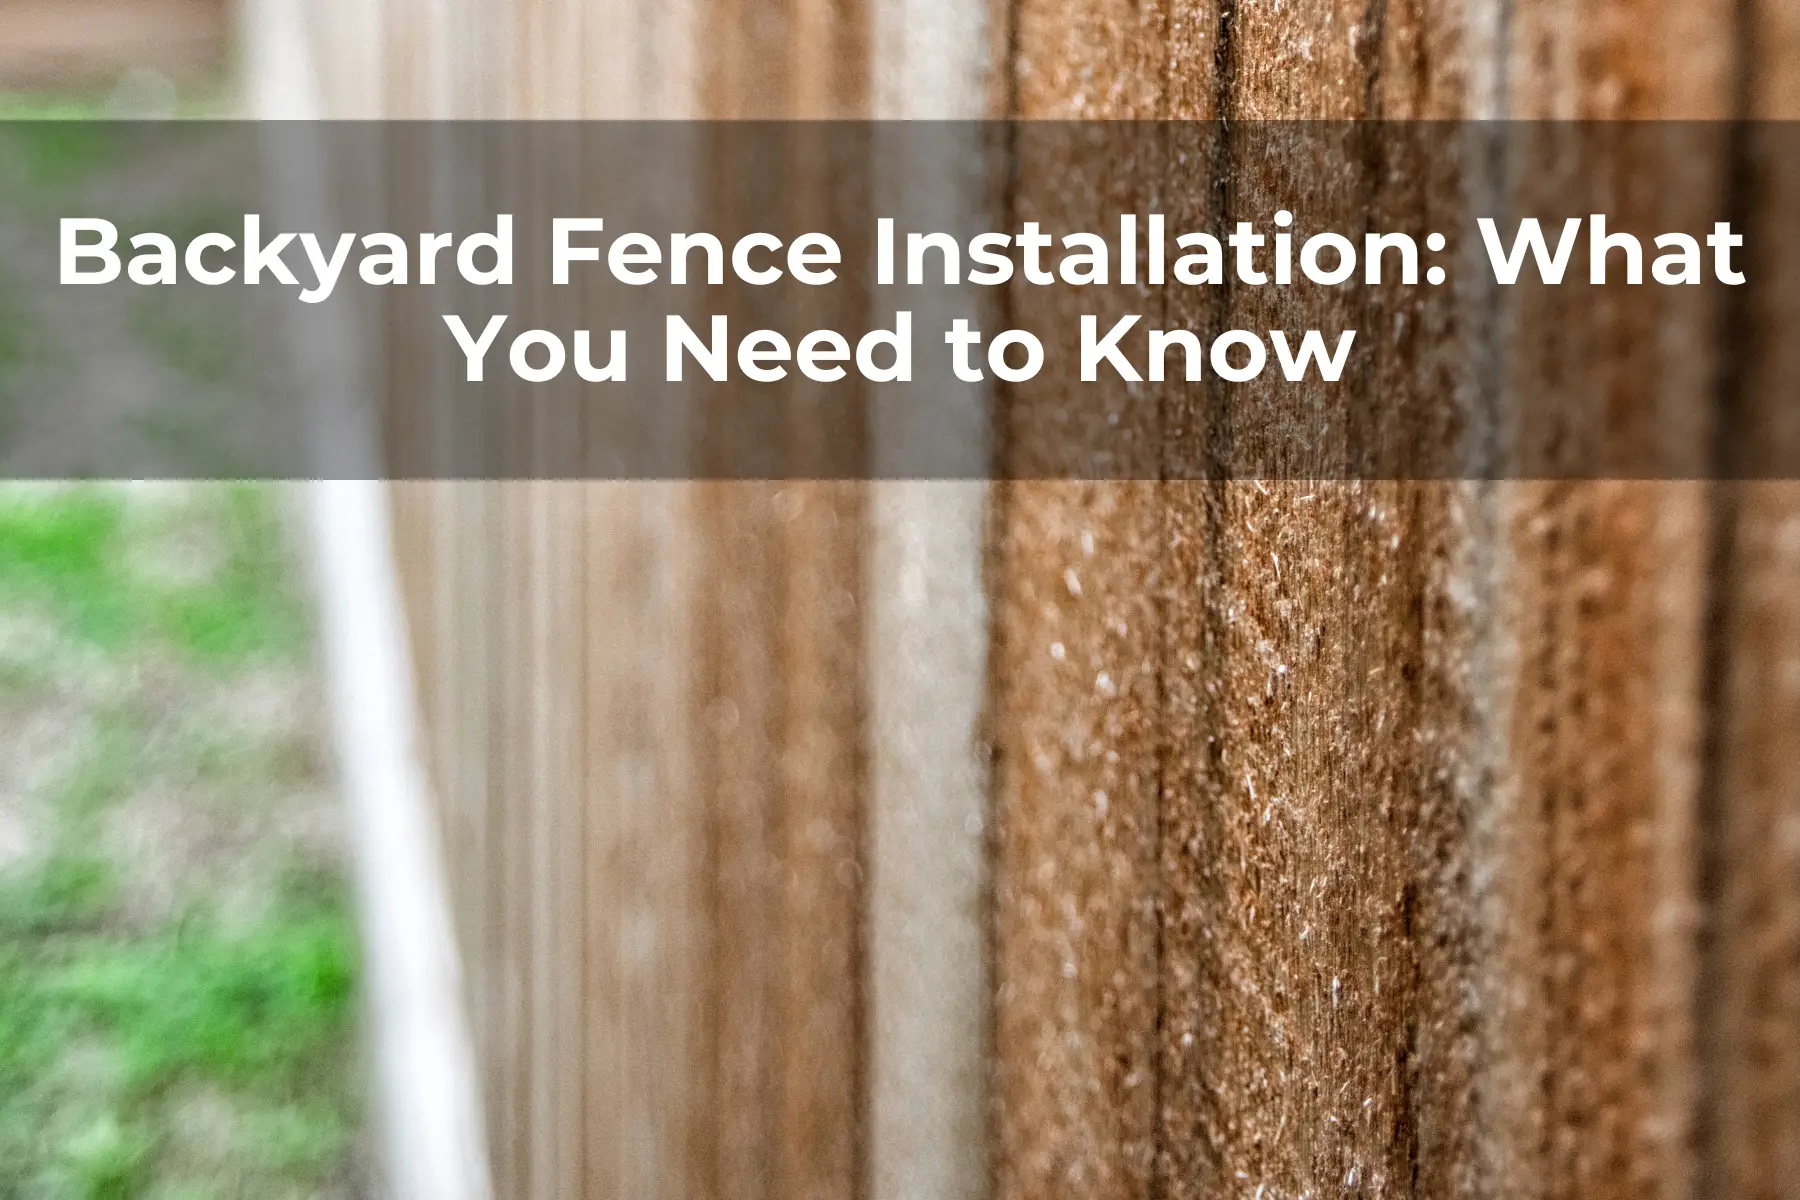 Backyard Fence Installation: What You Need to Know